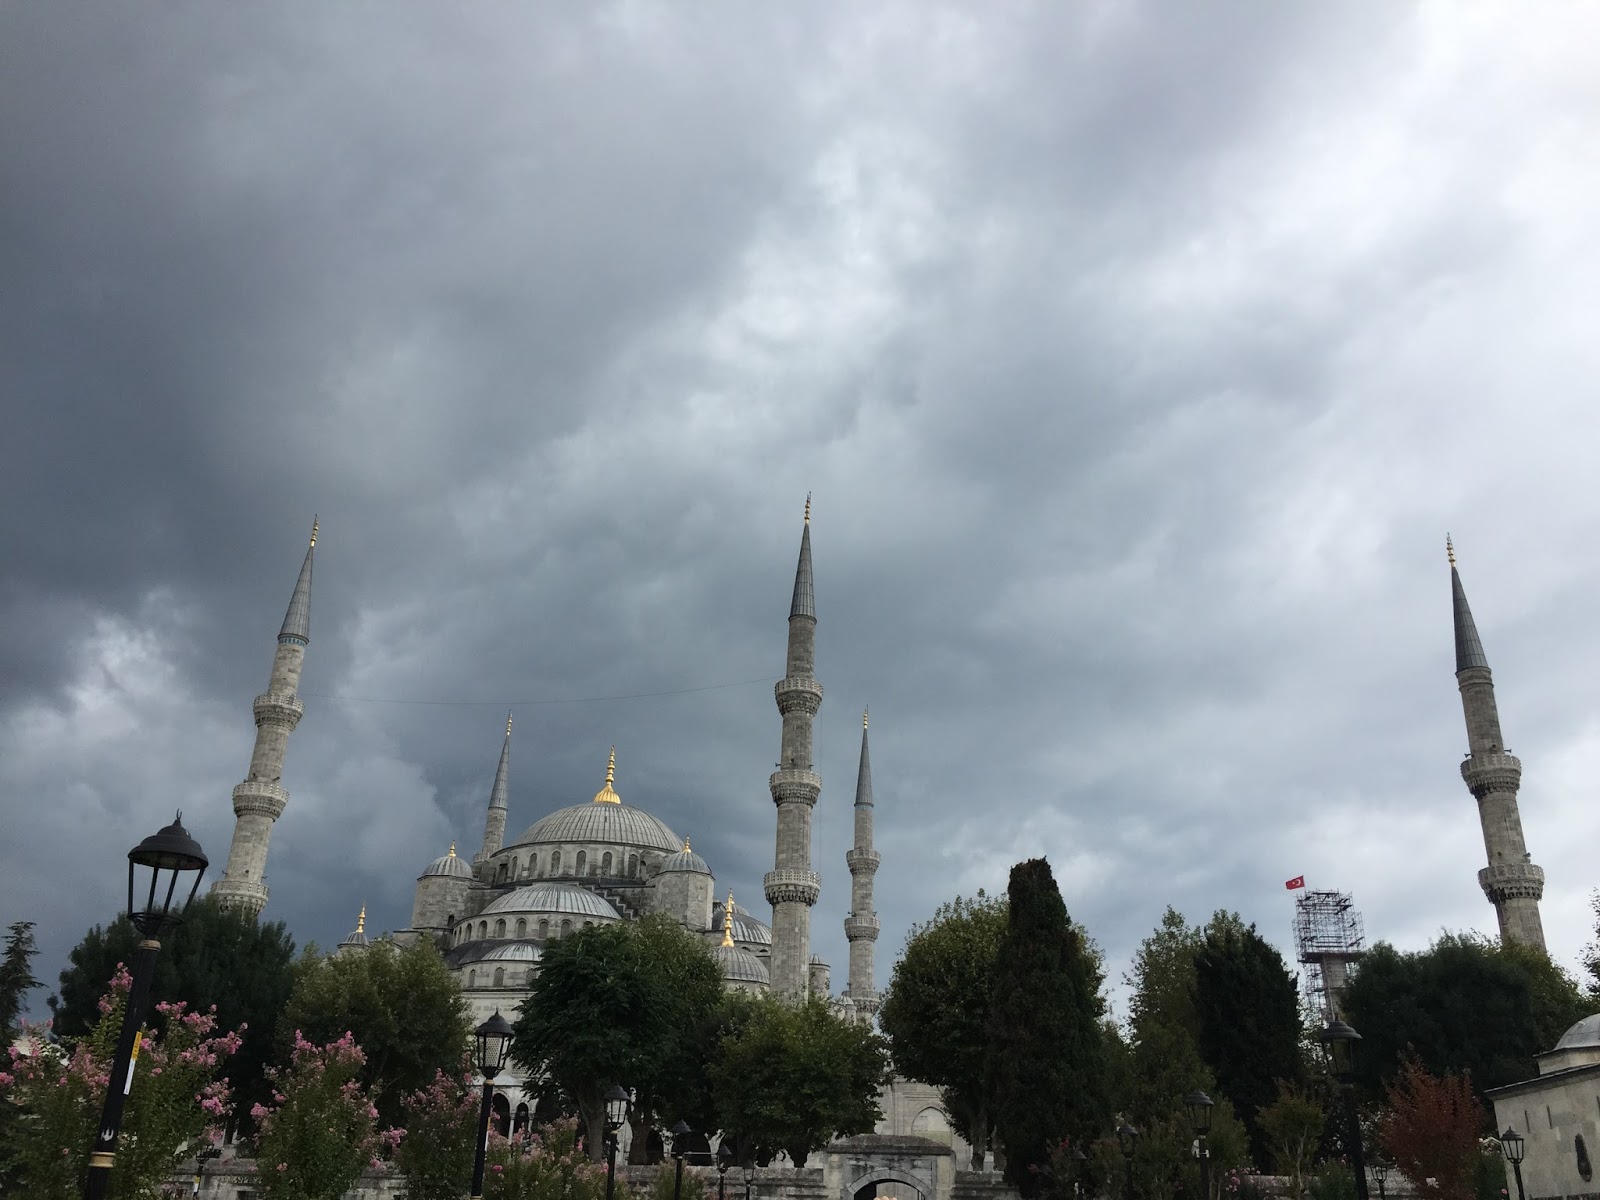 The imposing Blue Mosque